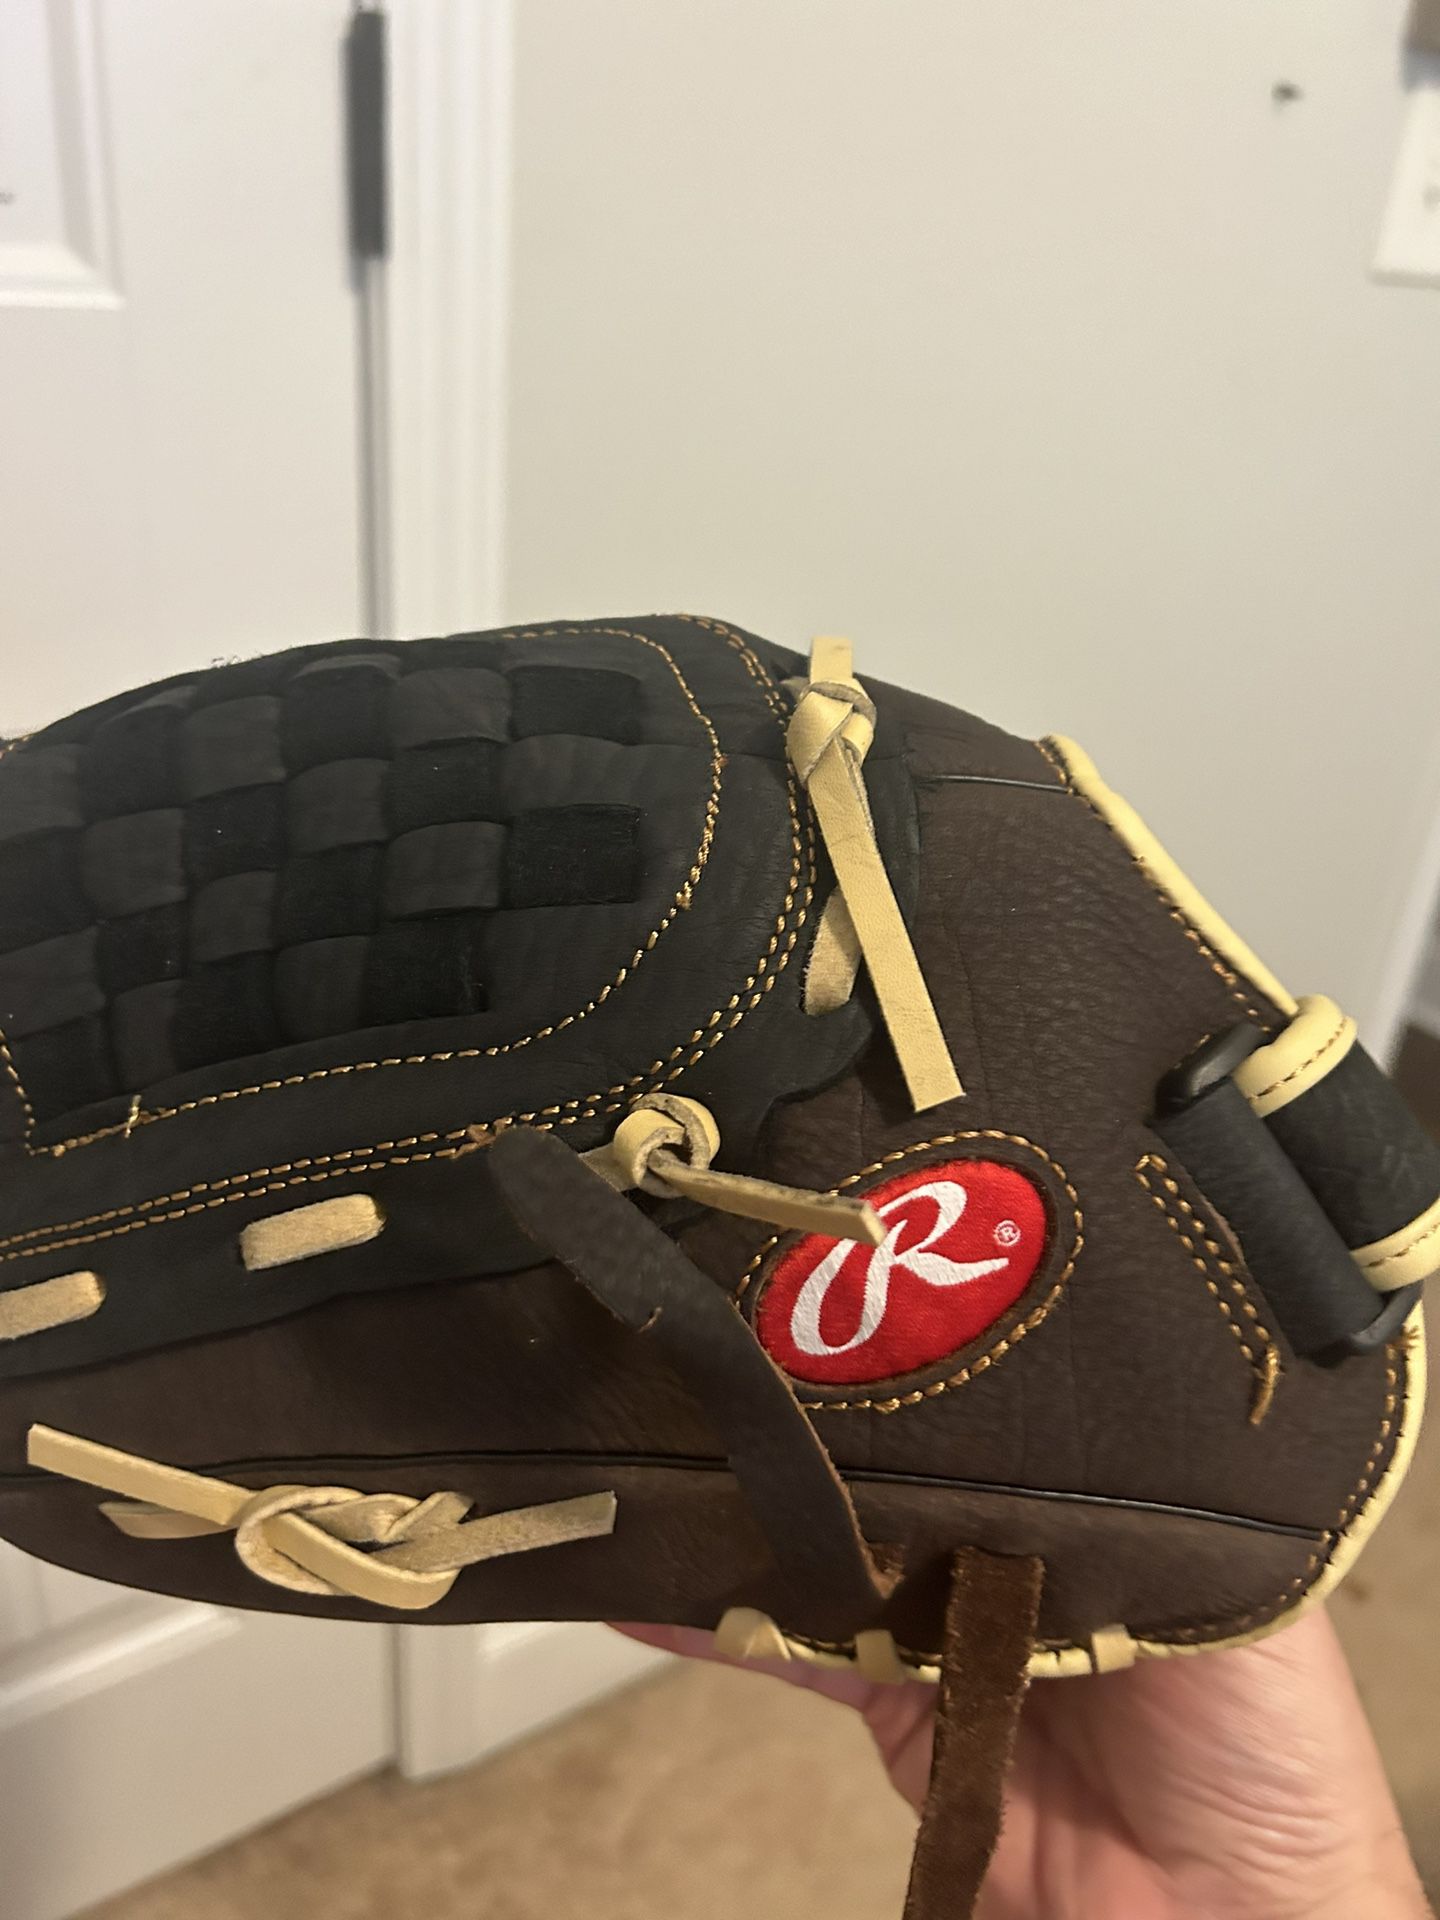 Used (only Been Used 4 Times)left Handed Rawlings Baseball Glove. 